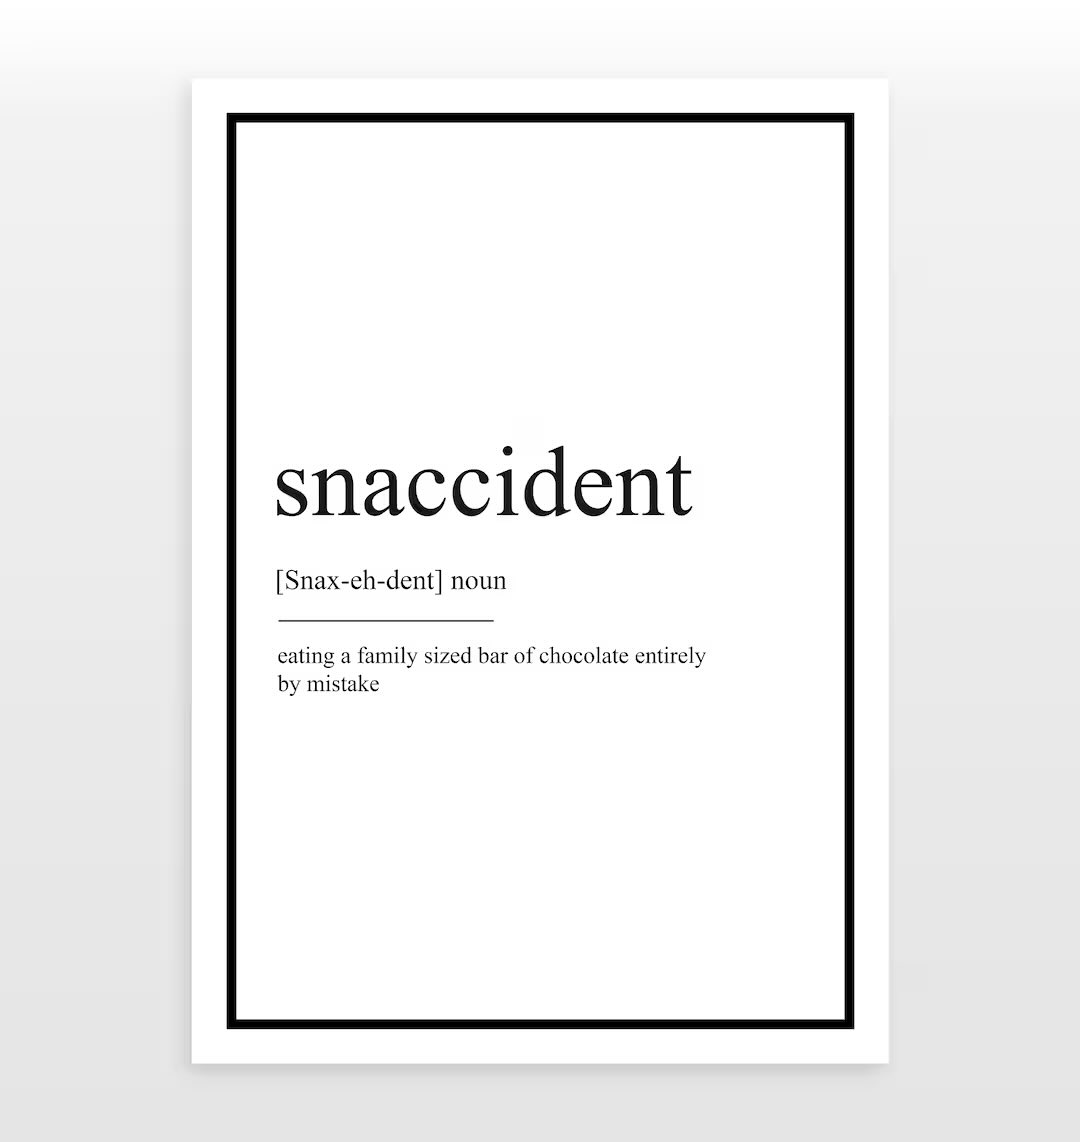 @ellymelly Its called a snaccident 😂